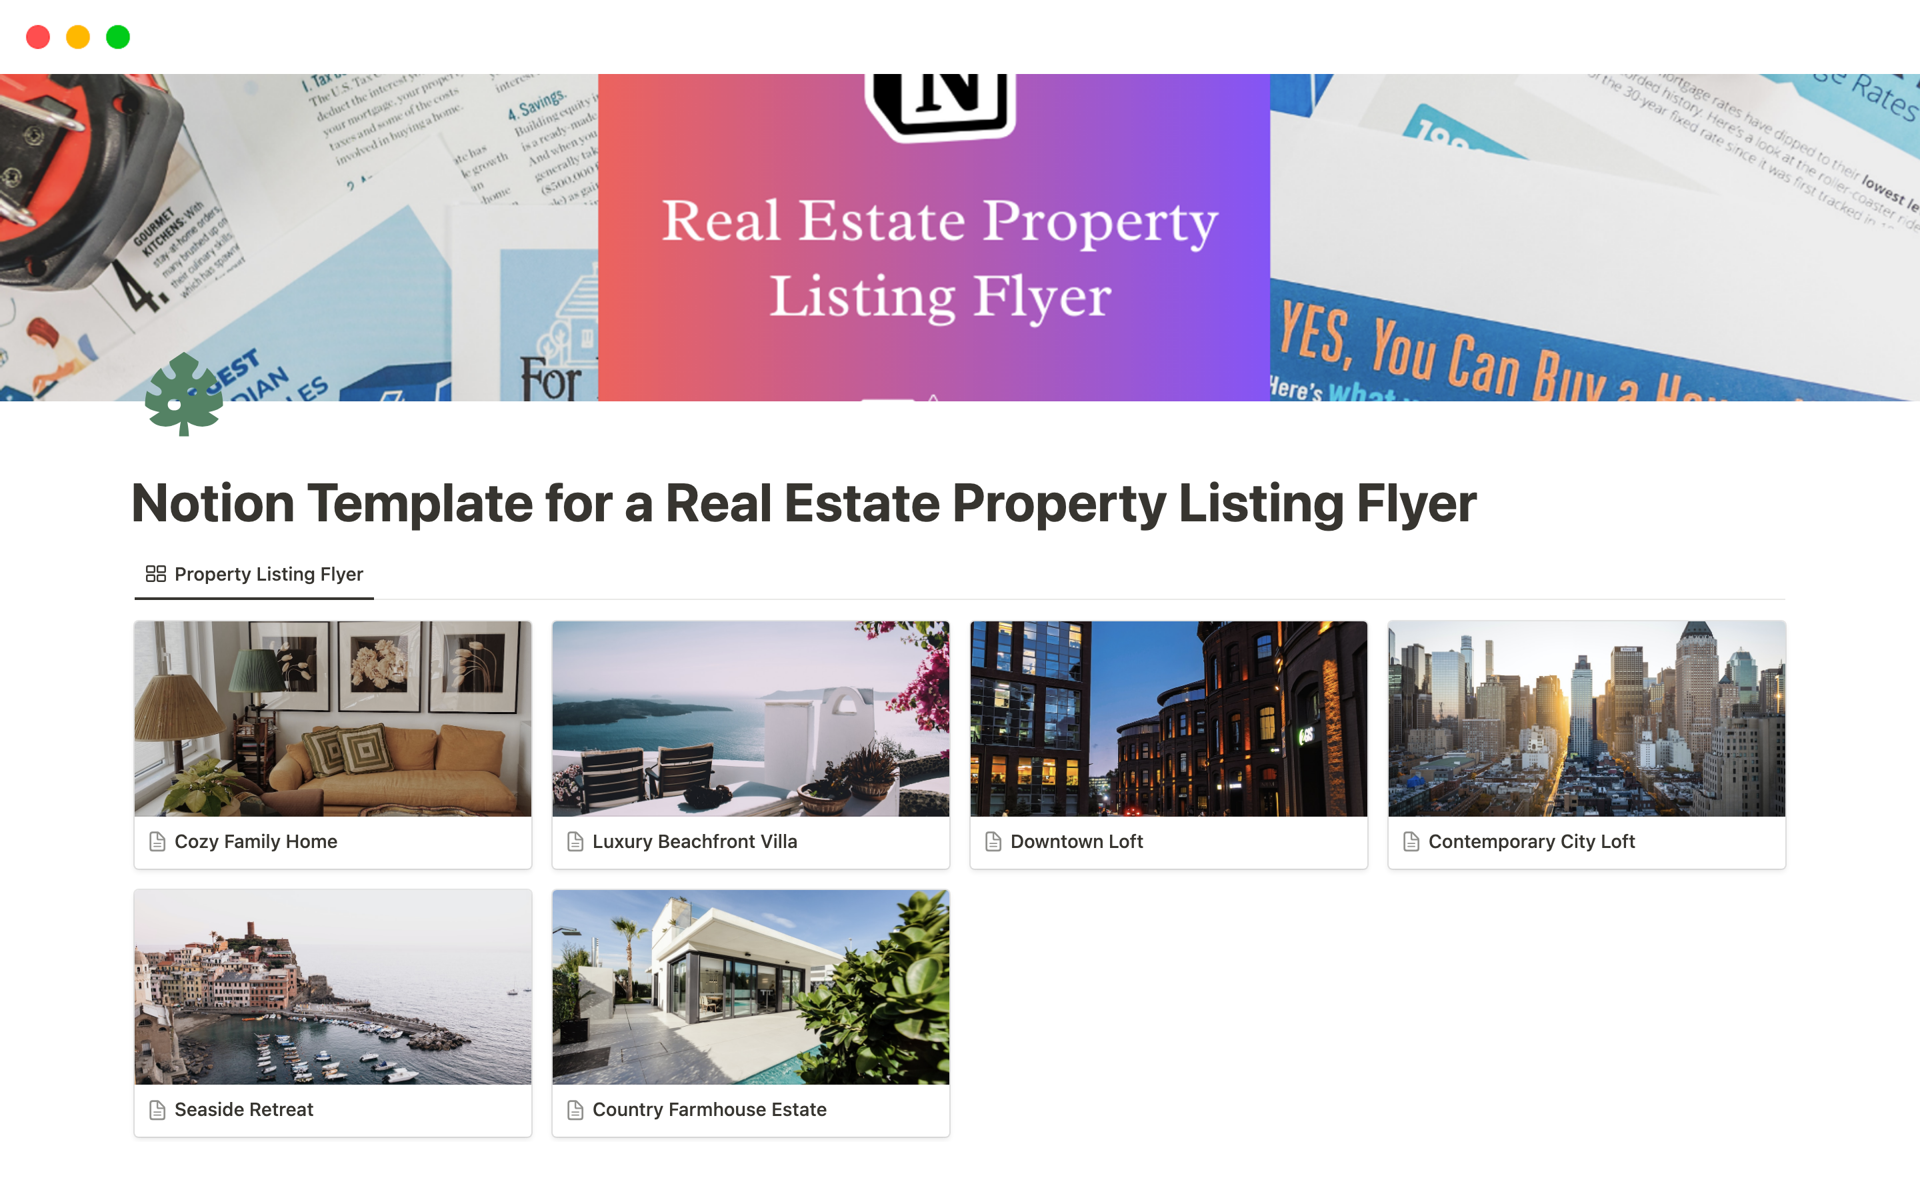 A template preview for Real Estate Property Listing Flyer